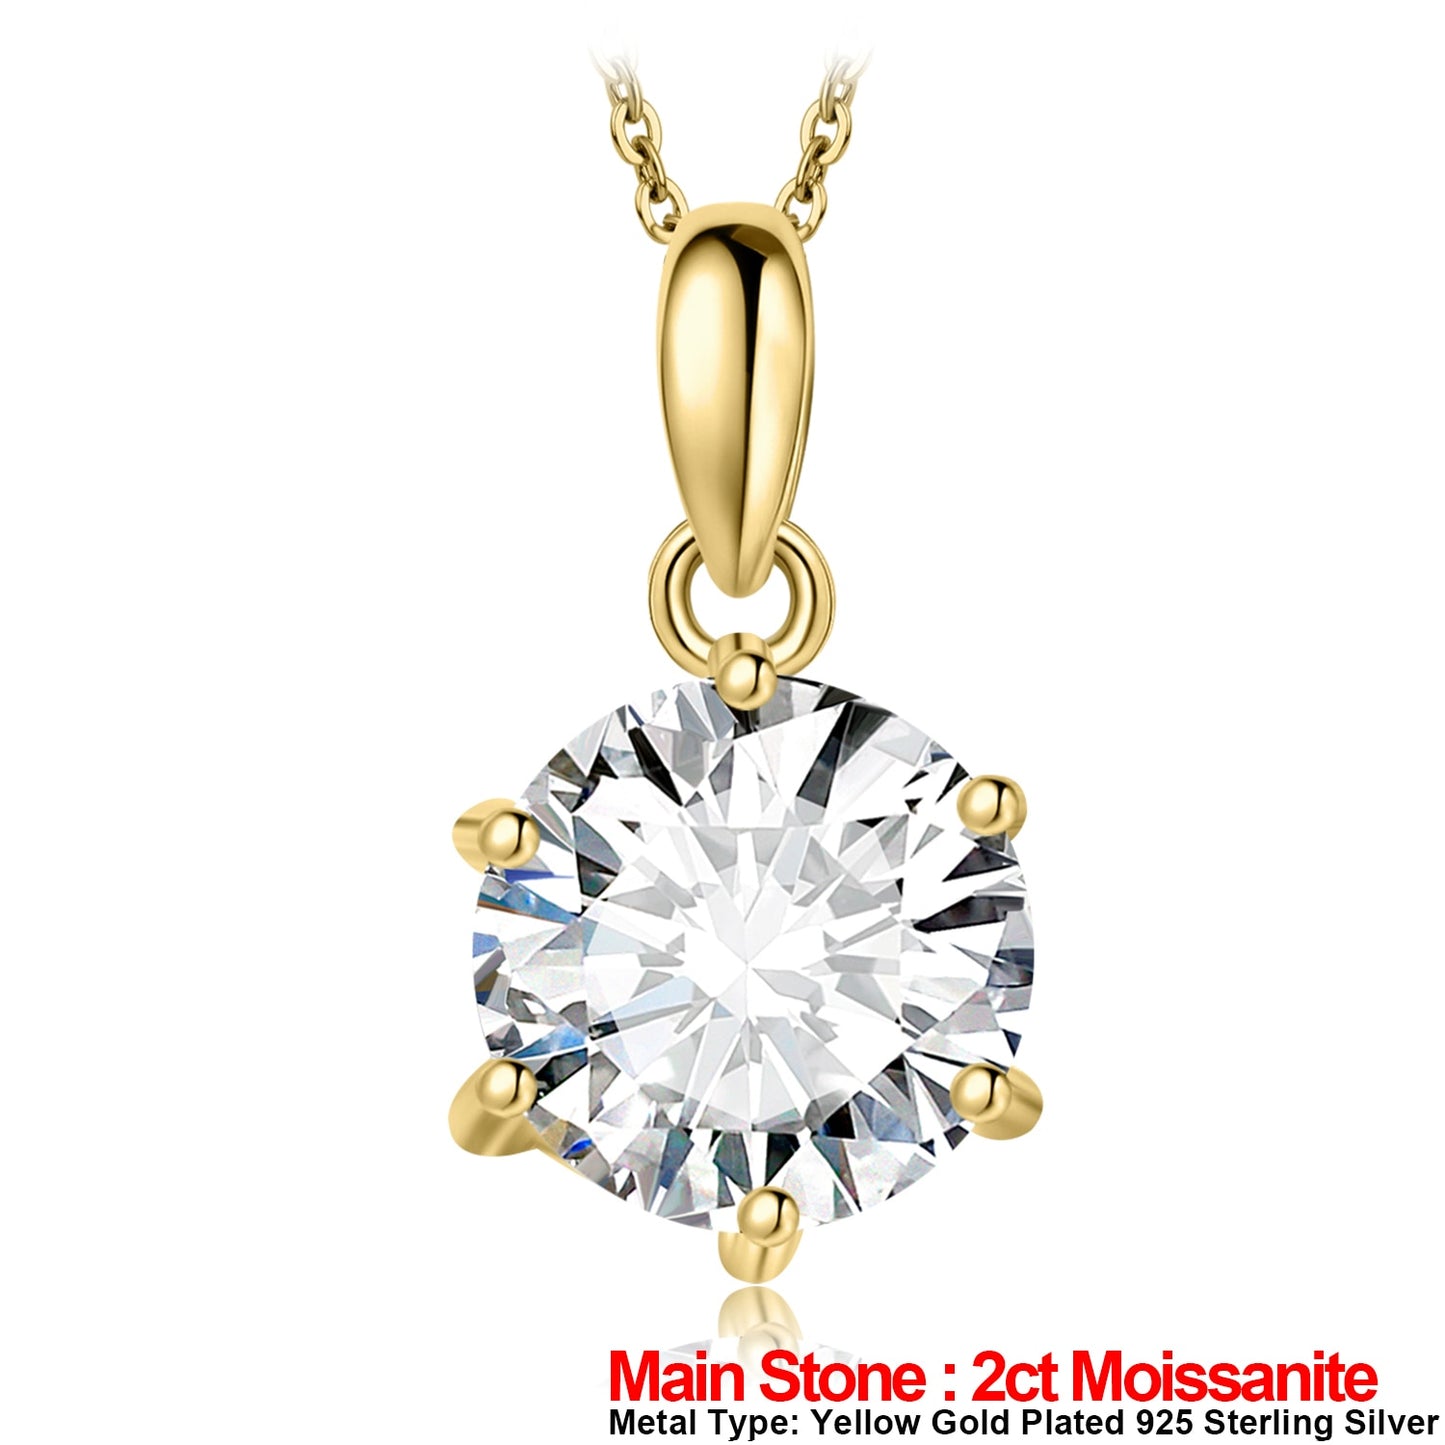 JewelryPalace Moissanite D Color 1ct 1.5ct 2ct 3ct Round 925 Sterling Silver Pendant Necklace for Woman No Chain Yellow Gold Plated 2 GRA Certificate